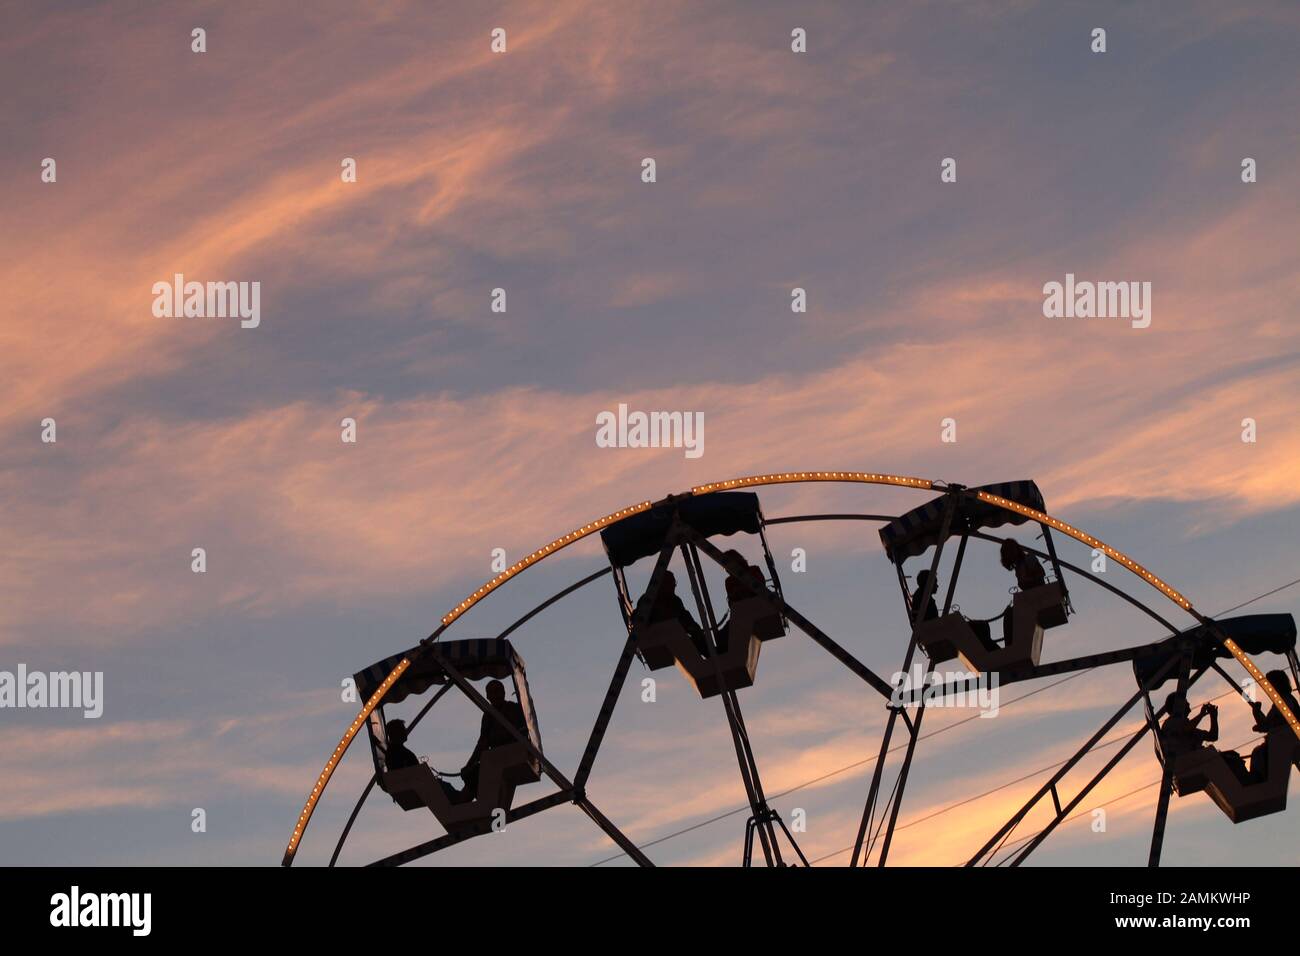 Oktoberfest 2013: The Ferris wheel on the 'Oidn Wiesn' with evening sky. [automated translation] Stock Photo